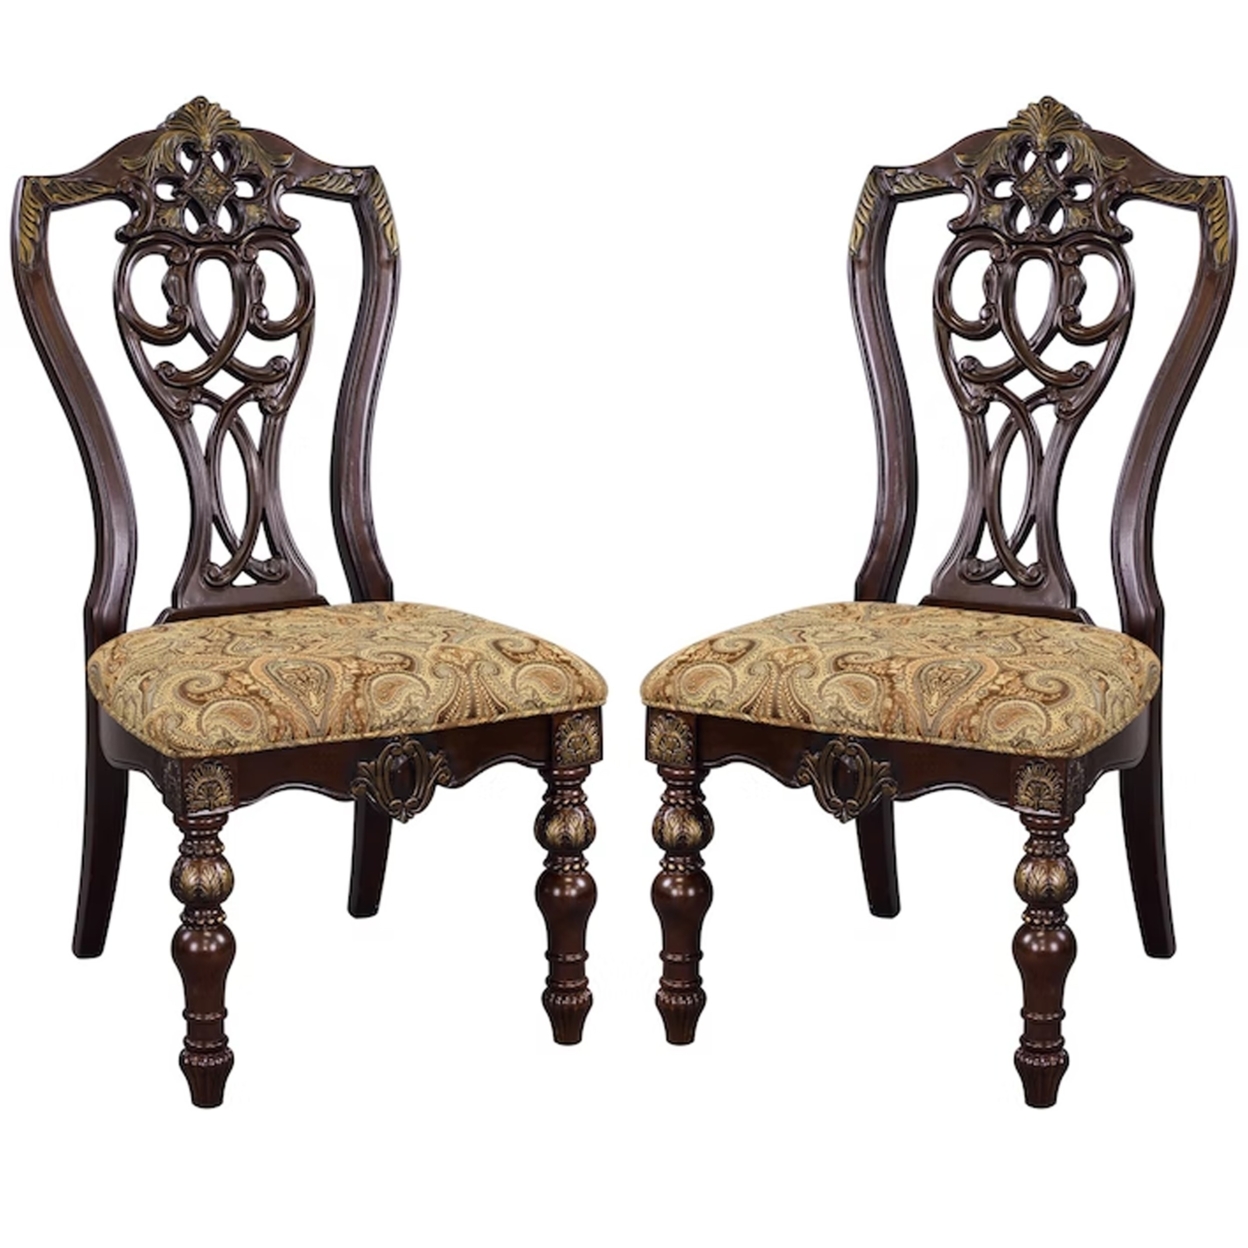 Fabric Upholstered Wooden Side Chair With Intricate Back, Set Of 2 , Cherry Brown- Saltoro Sherpi